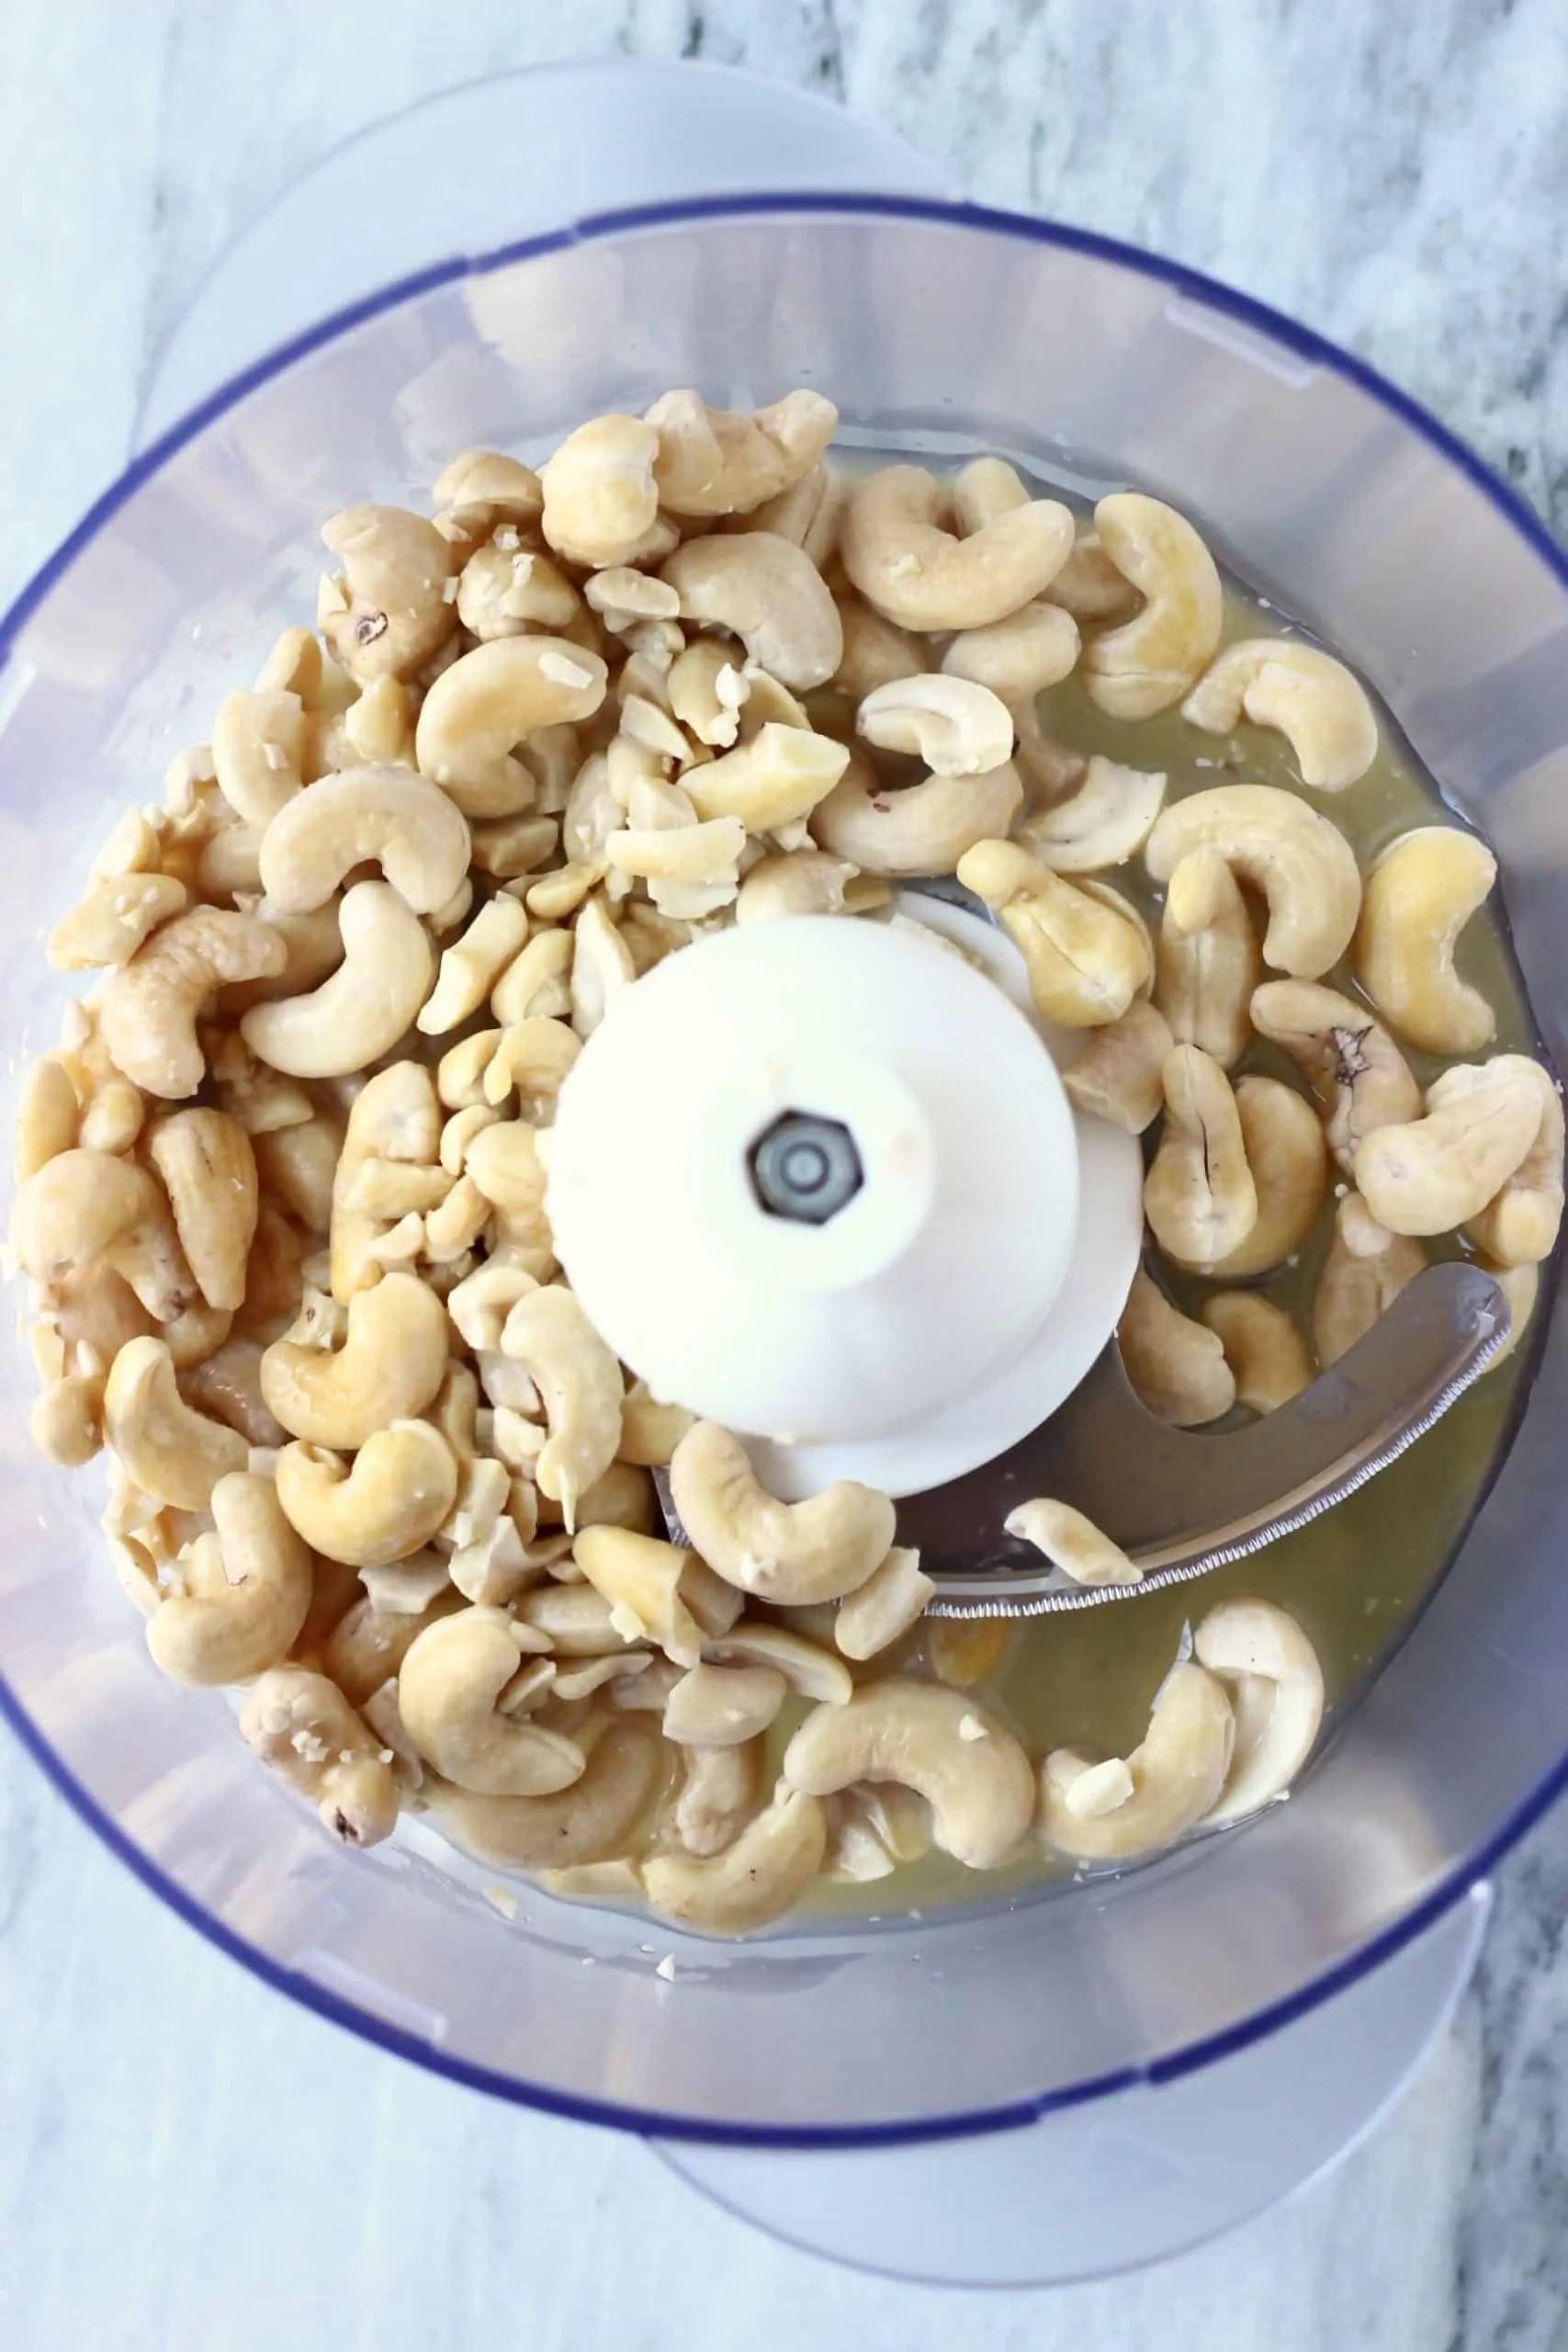 Cashew nuts, cacao butter and maple syrup in a food processor